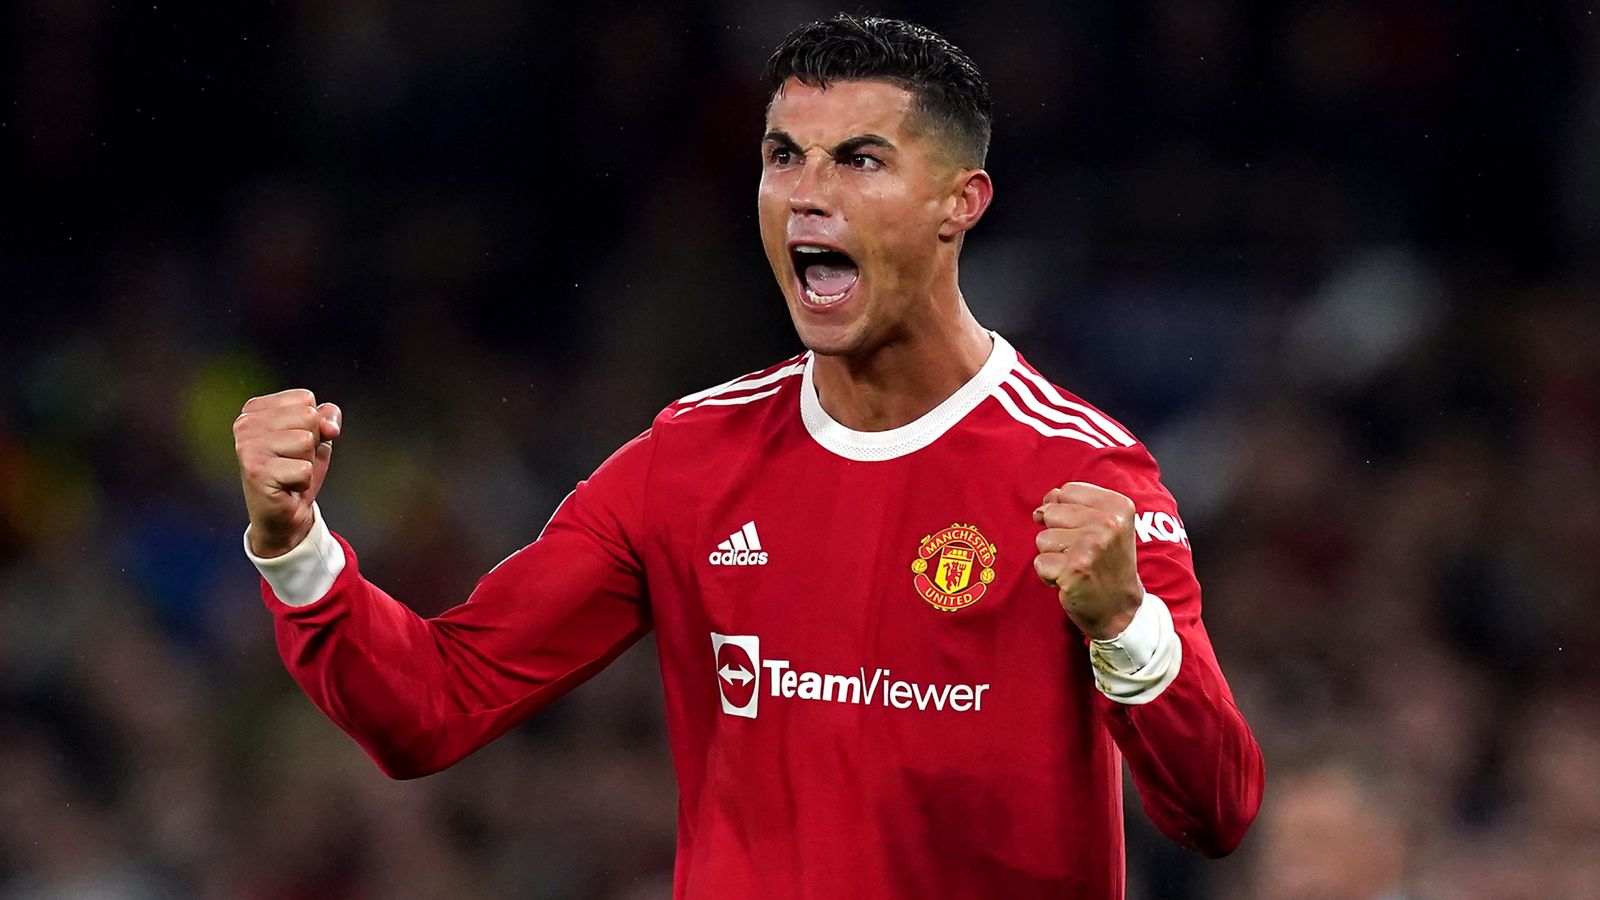   Cristiano Ronaldo: Man UTD forward among six nominees for Premier League Player of the Month award in September |  Football news

